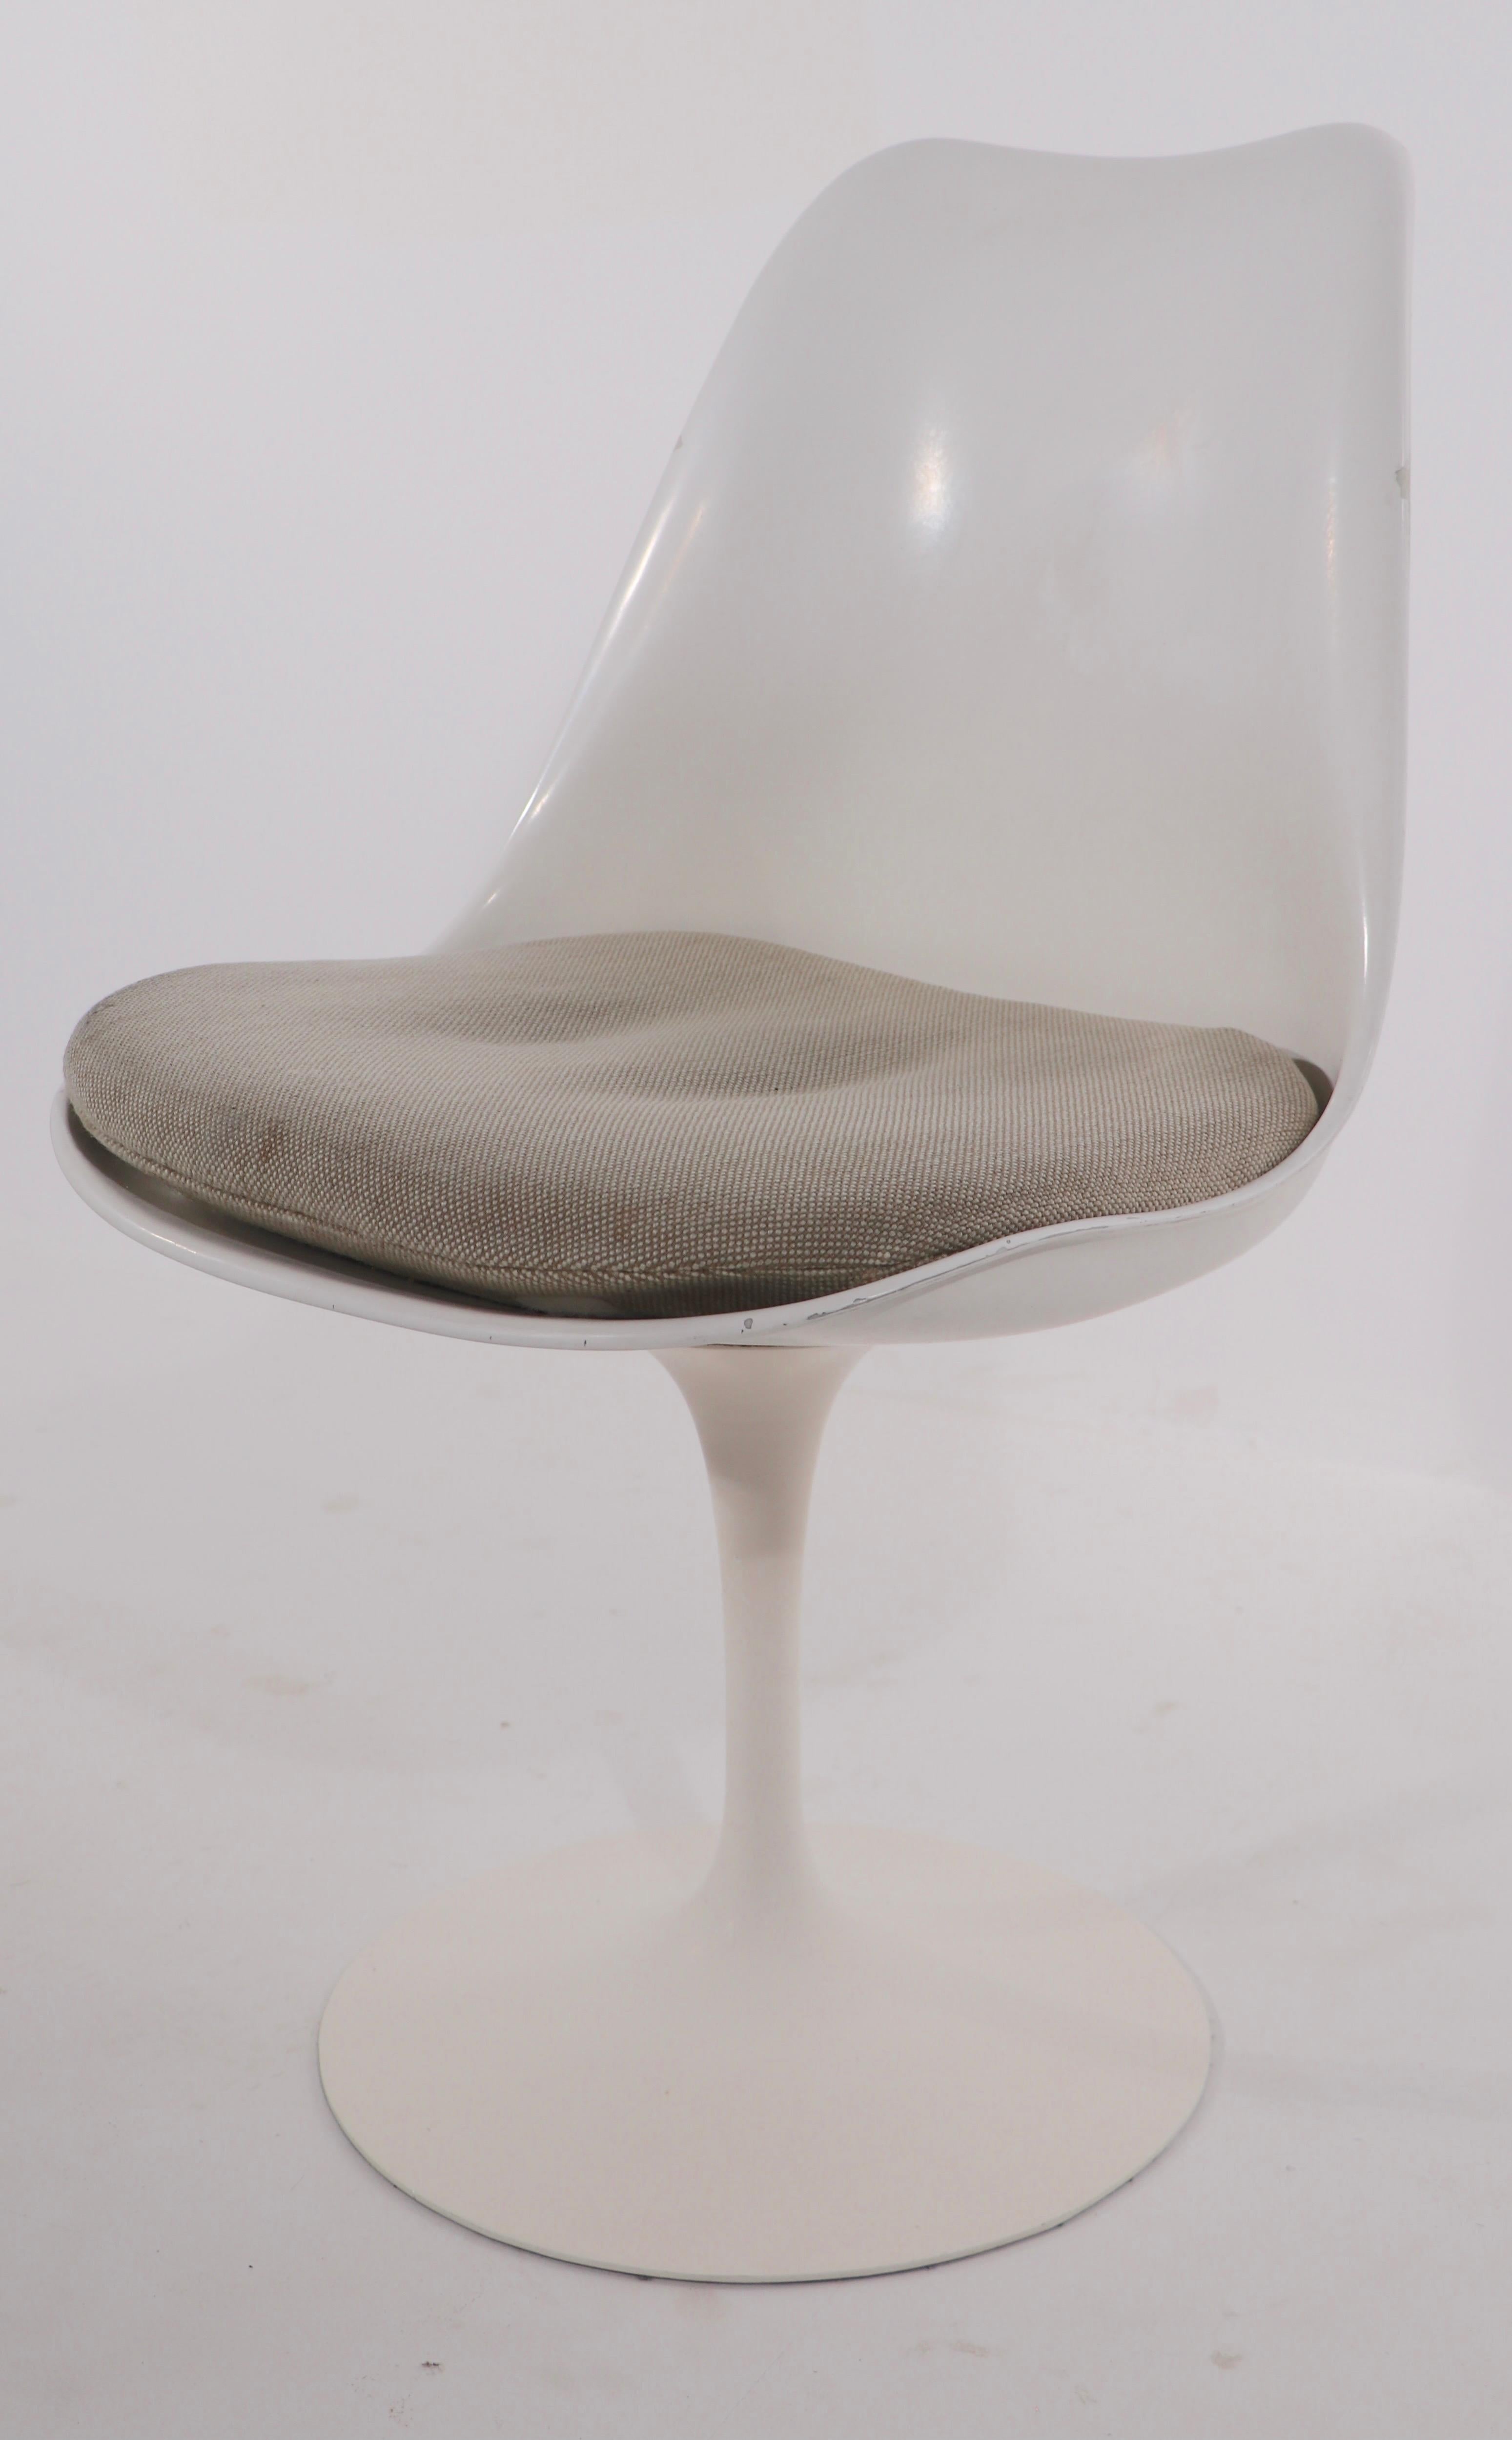 Nice pair of Saarinen design tulip chairs, marked Knoll 655 Madison Ave. Both chairs are in good, original condition, free of cracks, chips or structural damage. Both show minor paint loss along the back support edge, cosmetic only, not damage, or